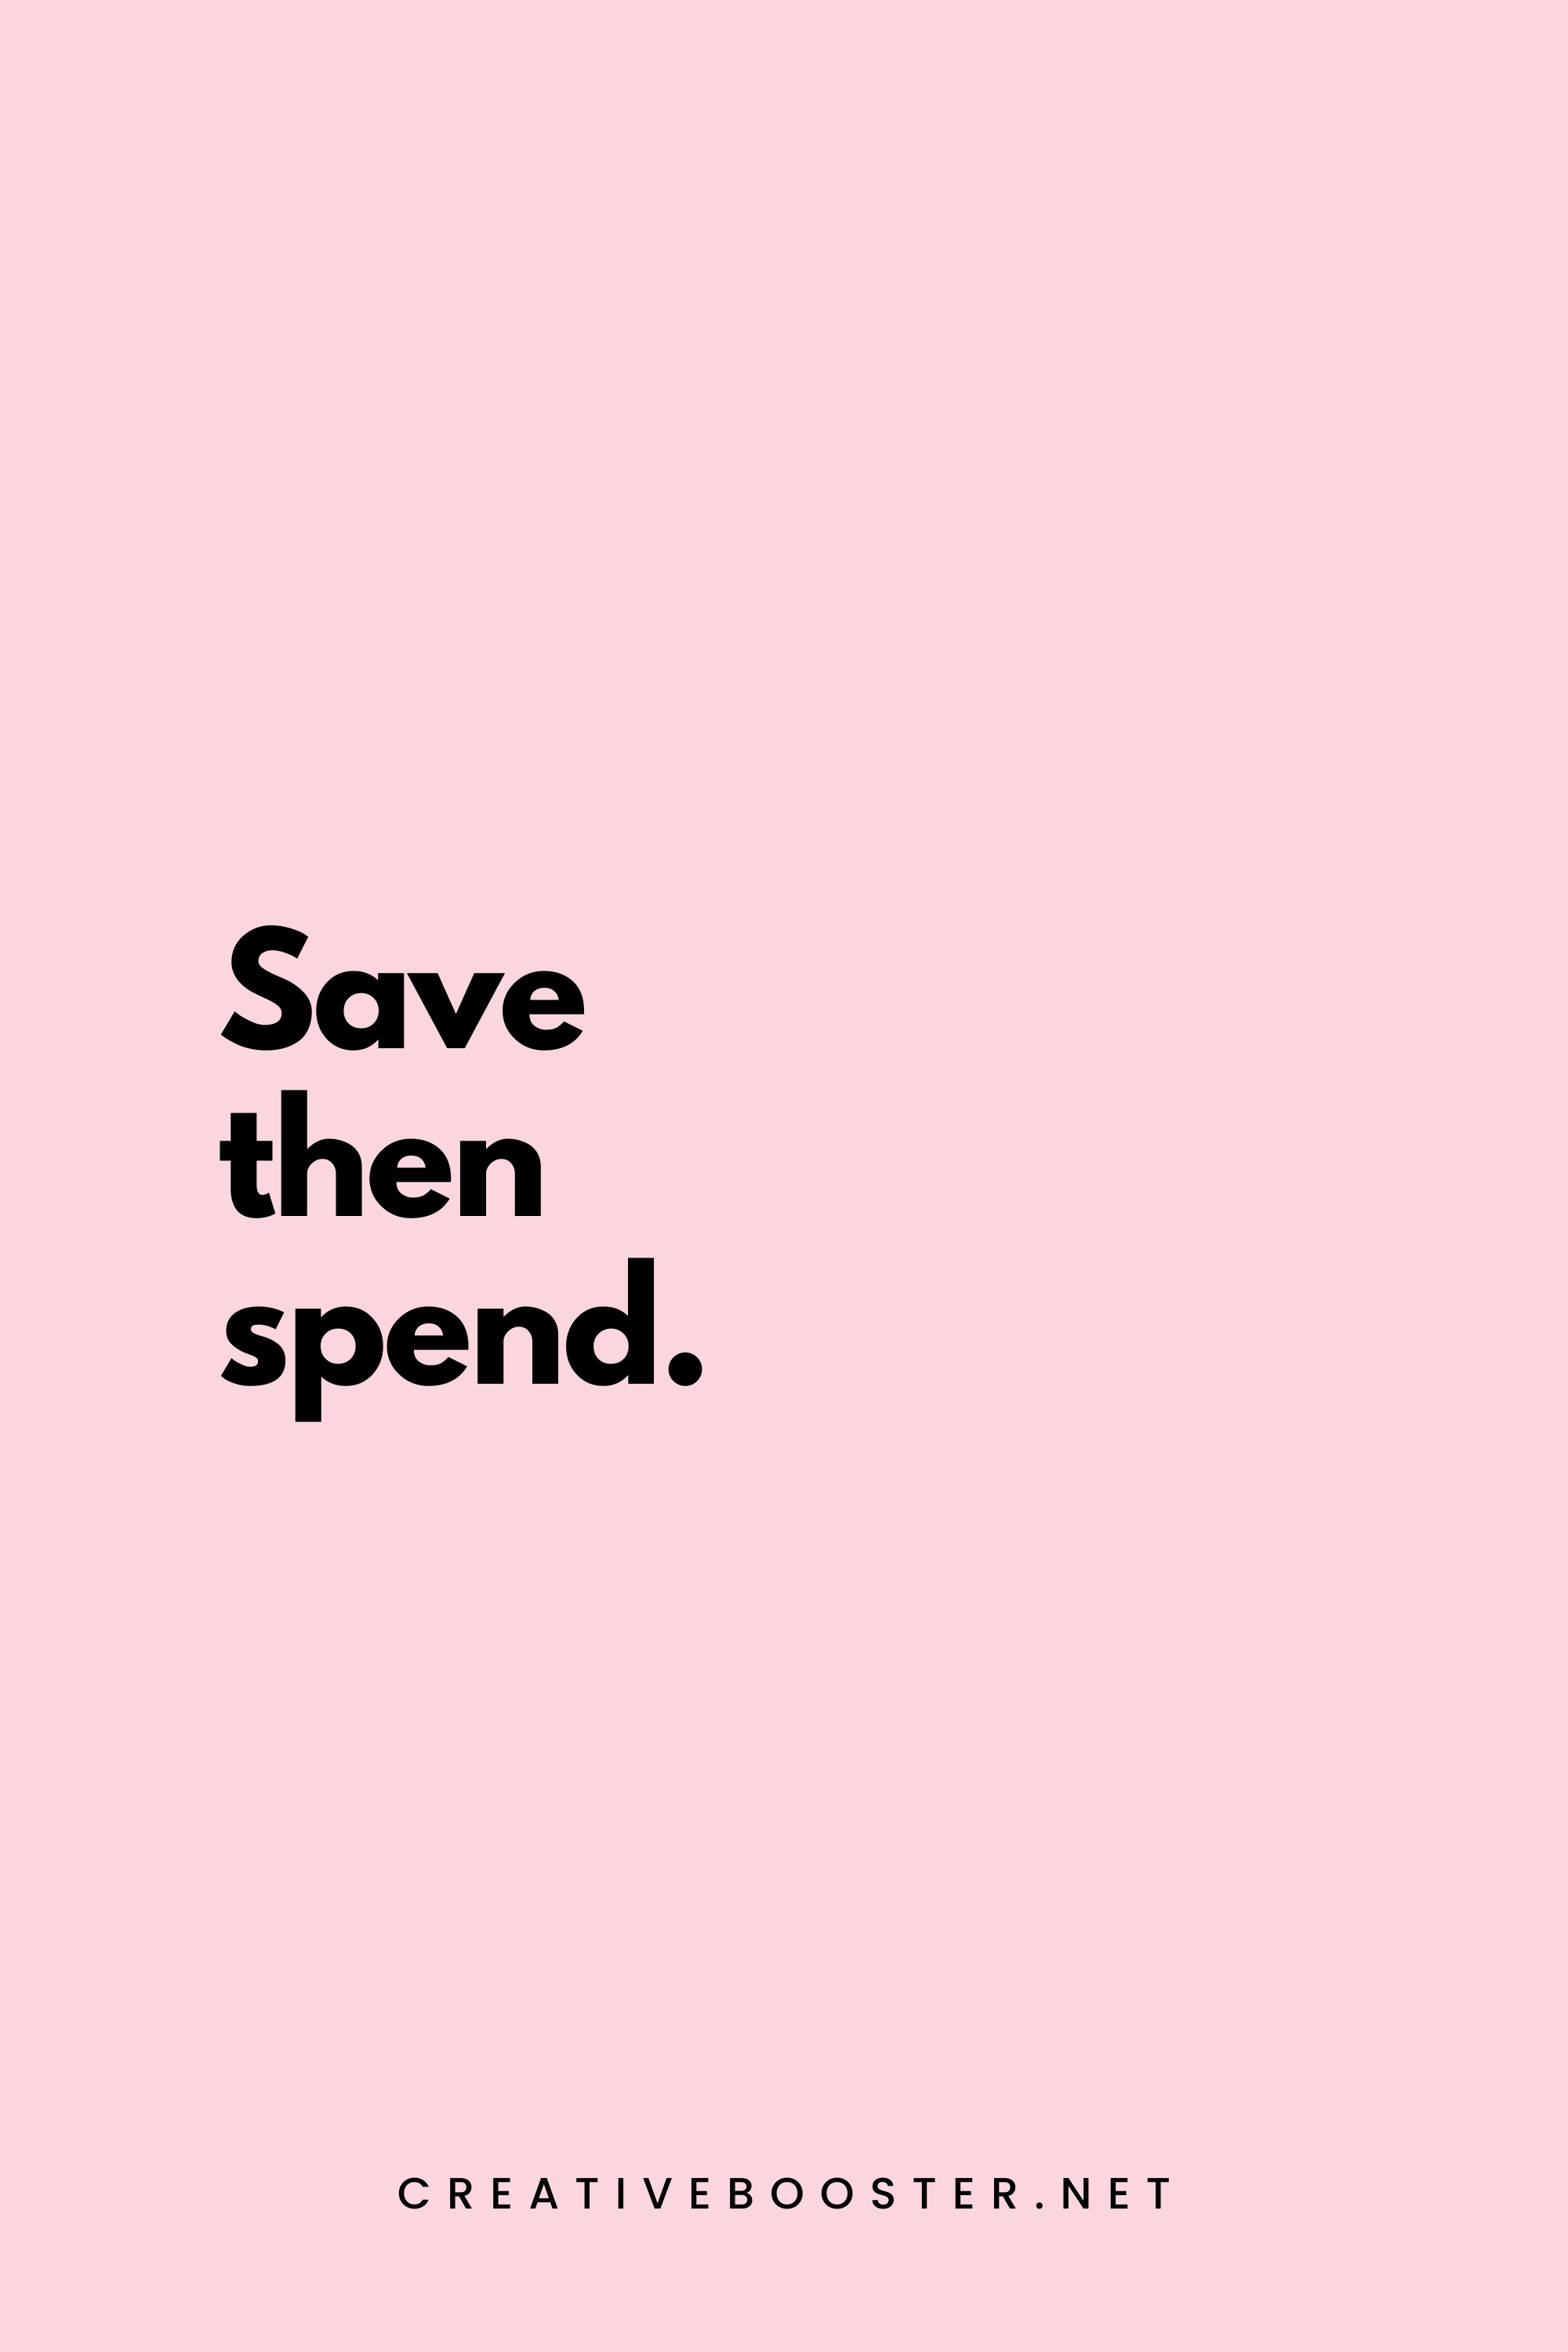 21. Save then spend. - Unknown - 2. Short Financial Freedom Quotes